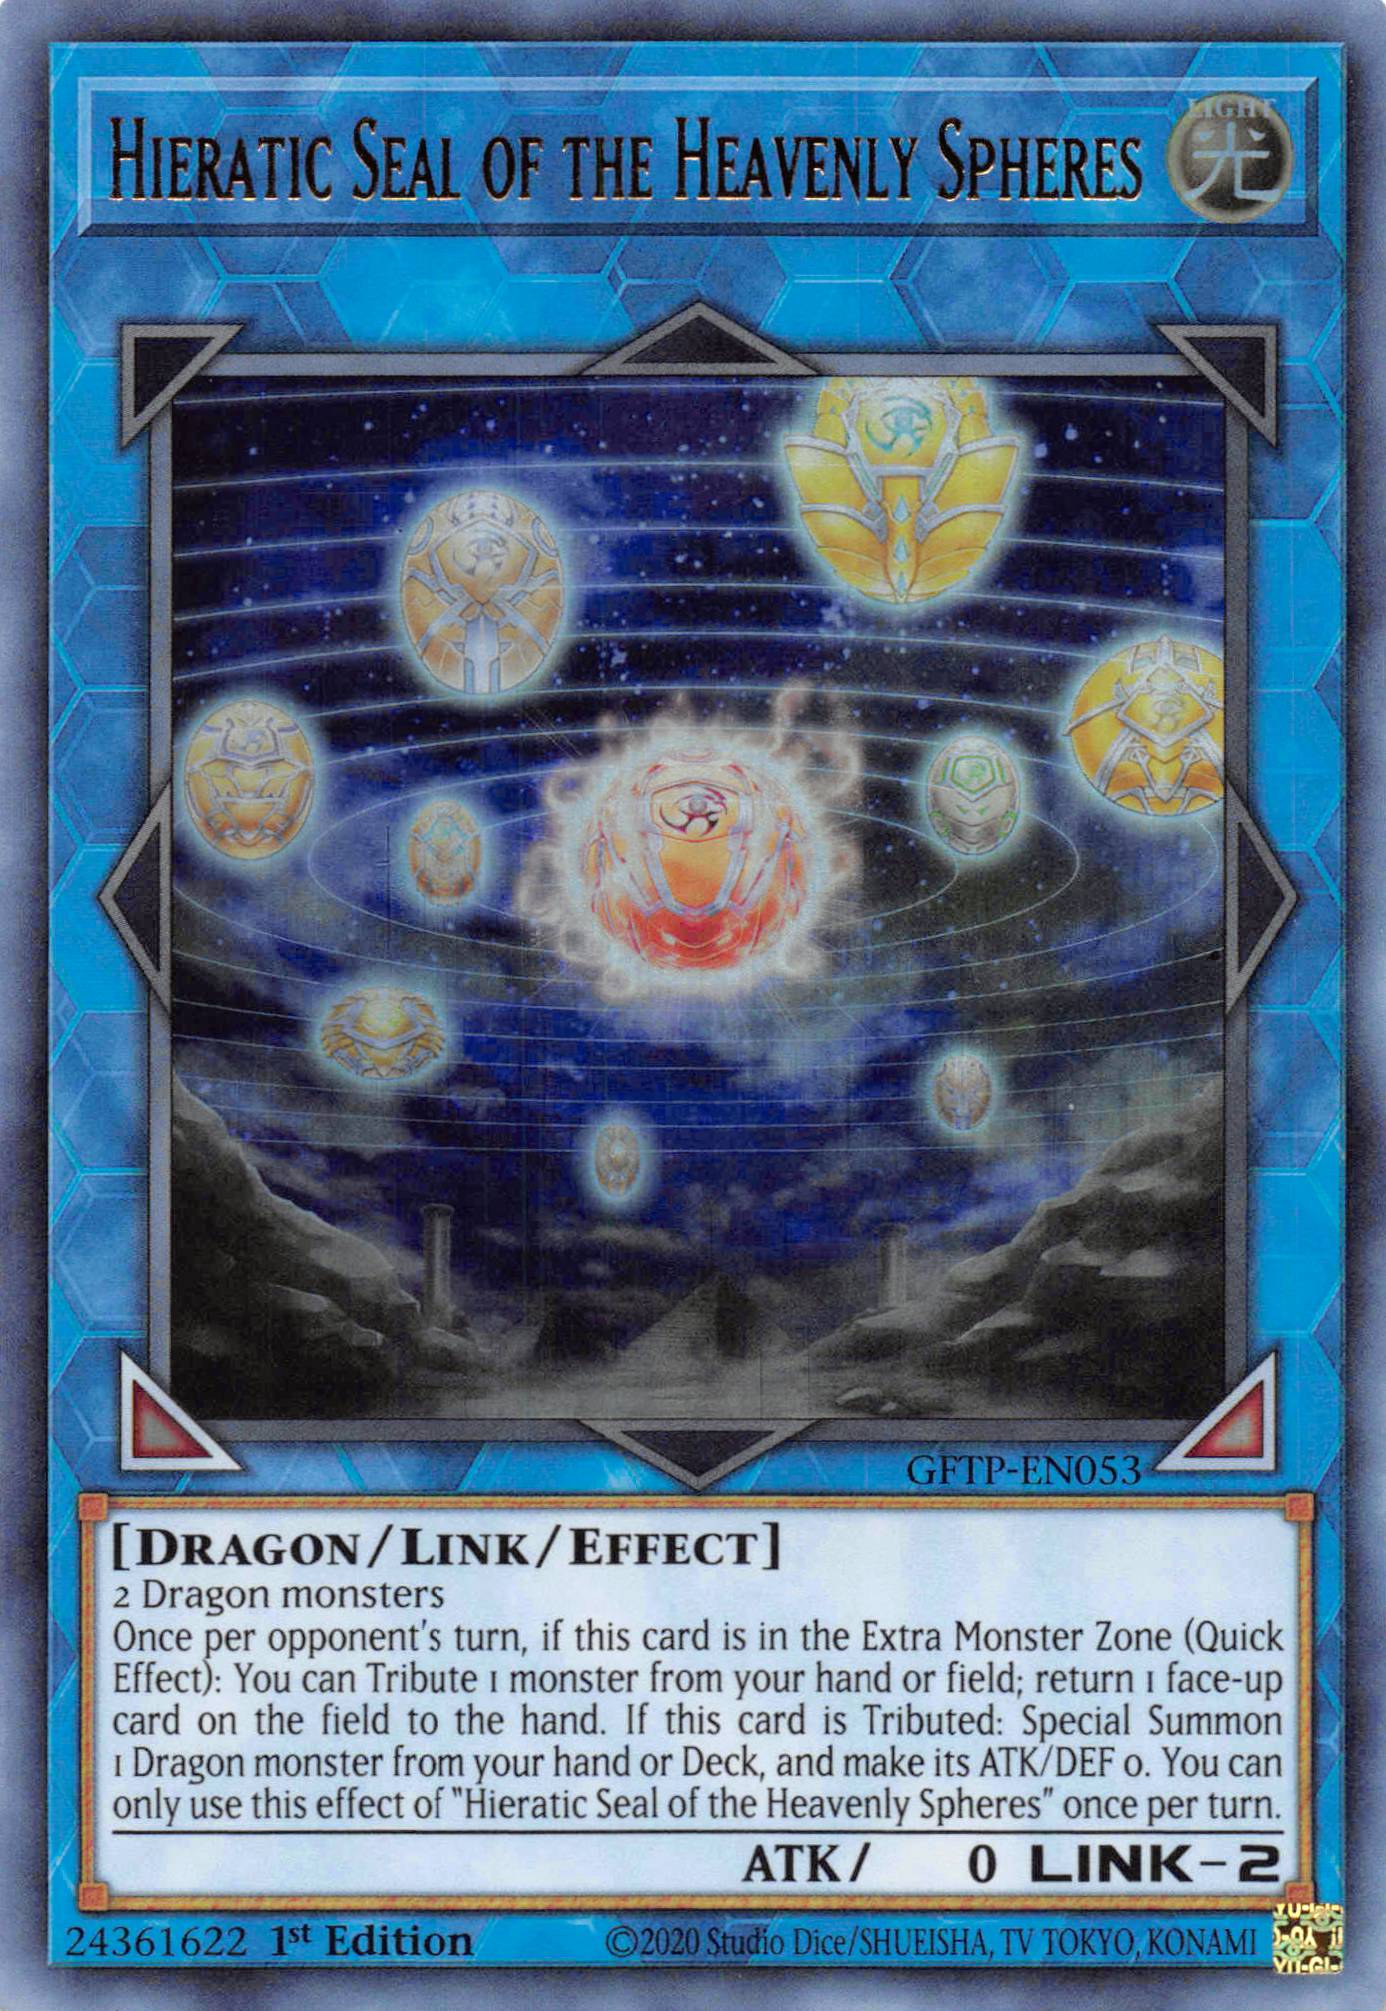 Hieratic Seal of the Heavenly Spheres [GFTP-EN053] Ultra Rare